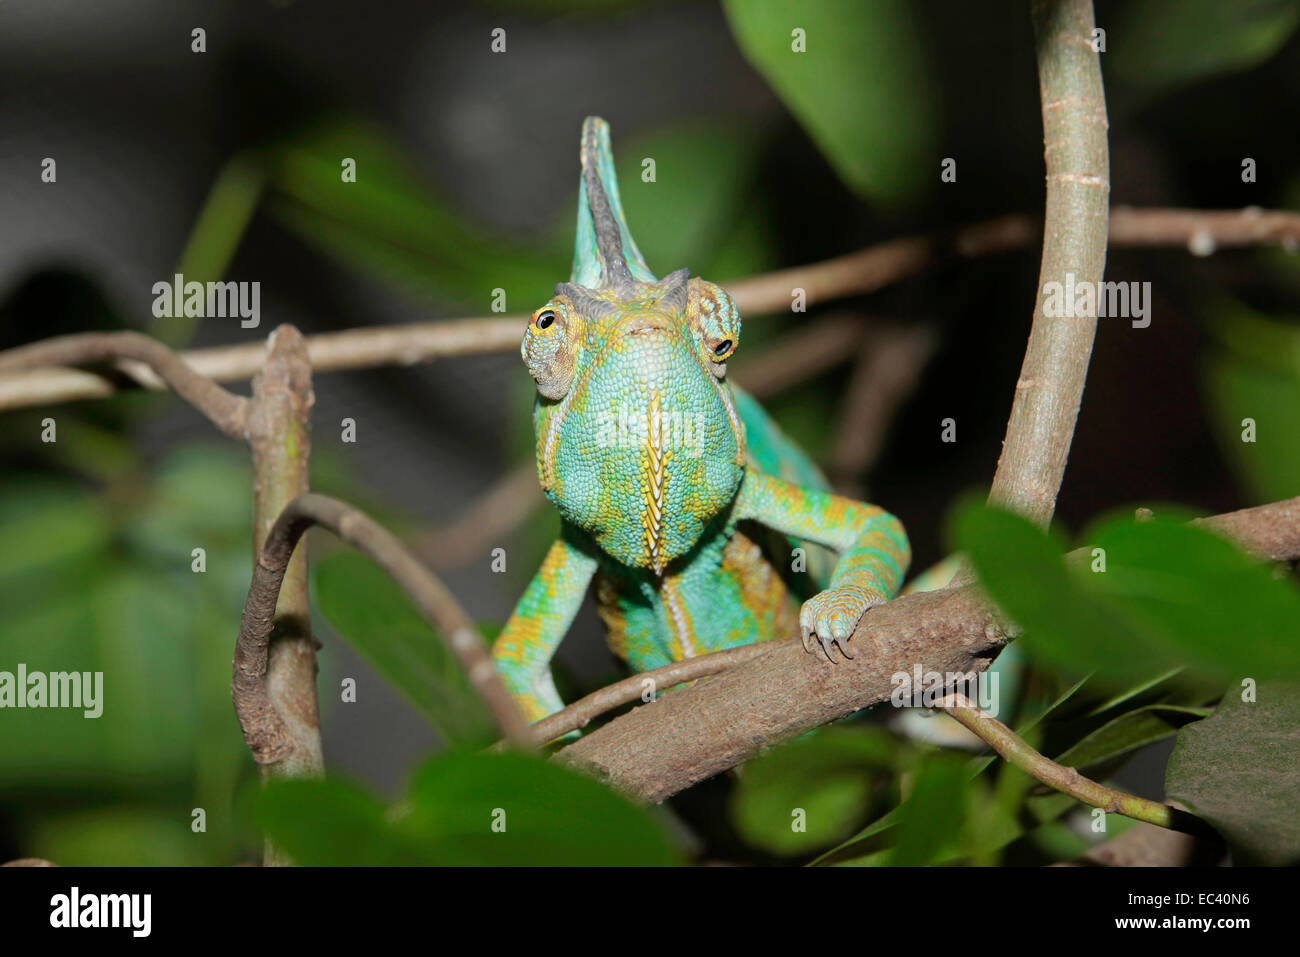 Veiled or Yemen Chameleon (Chamaeleon calyptratus) independent and squinty eyes. Frontal view Stock Photo